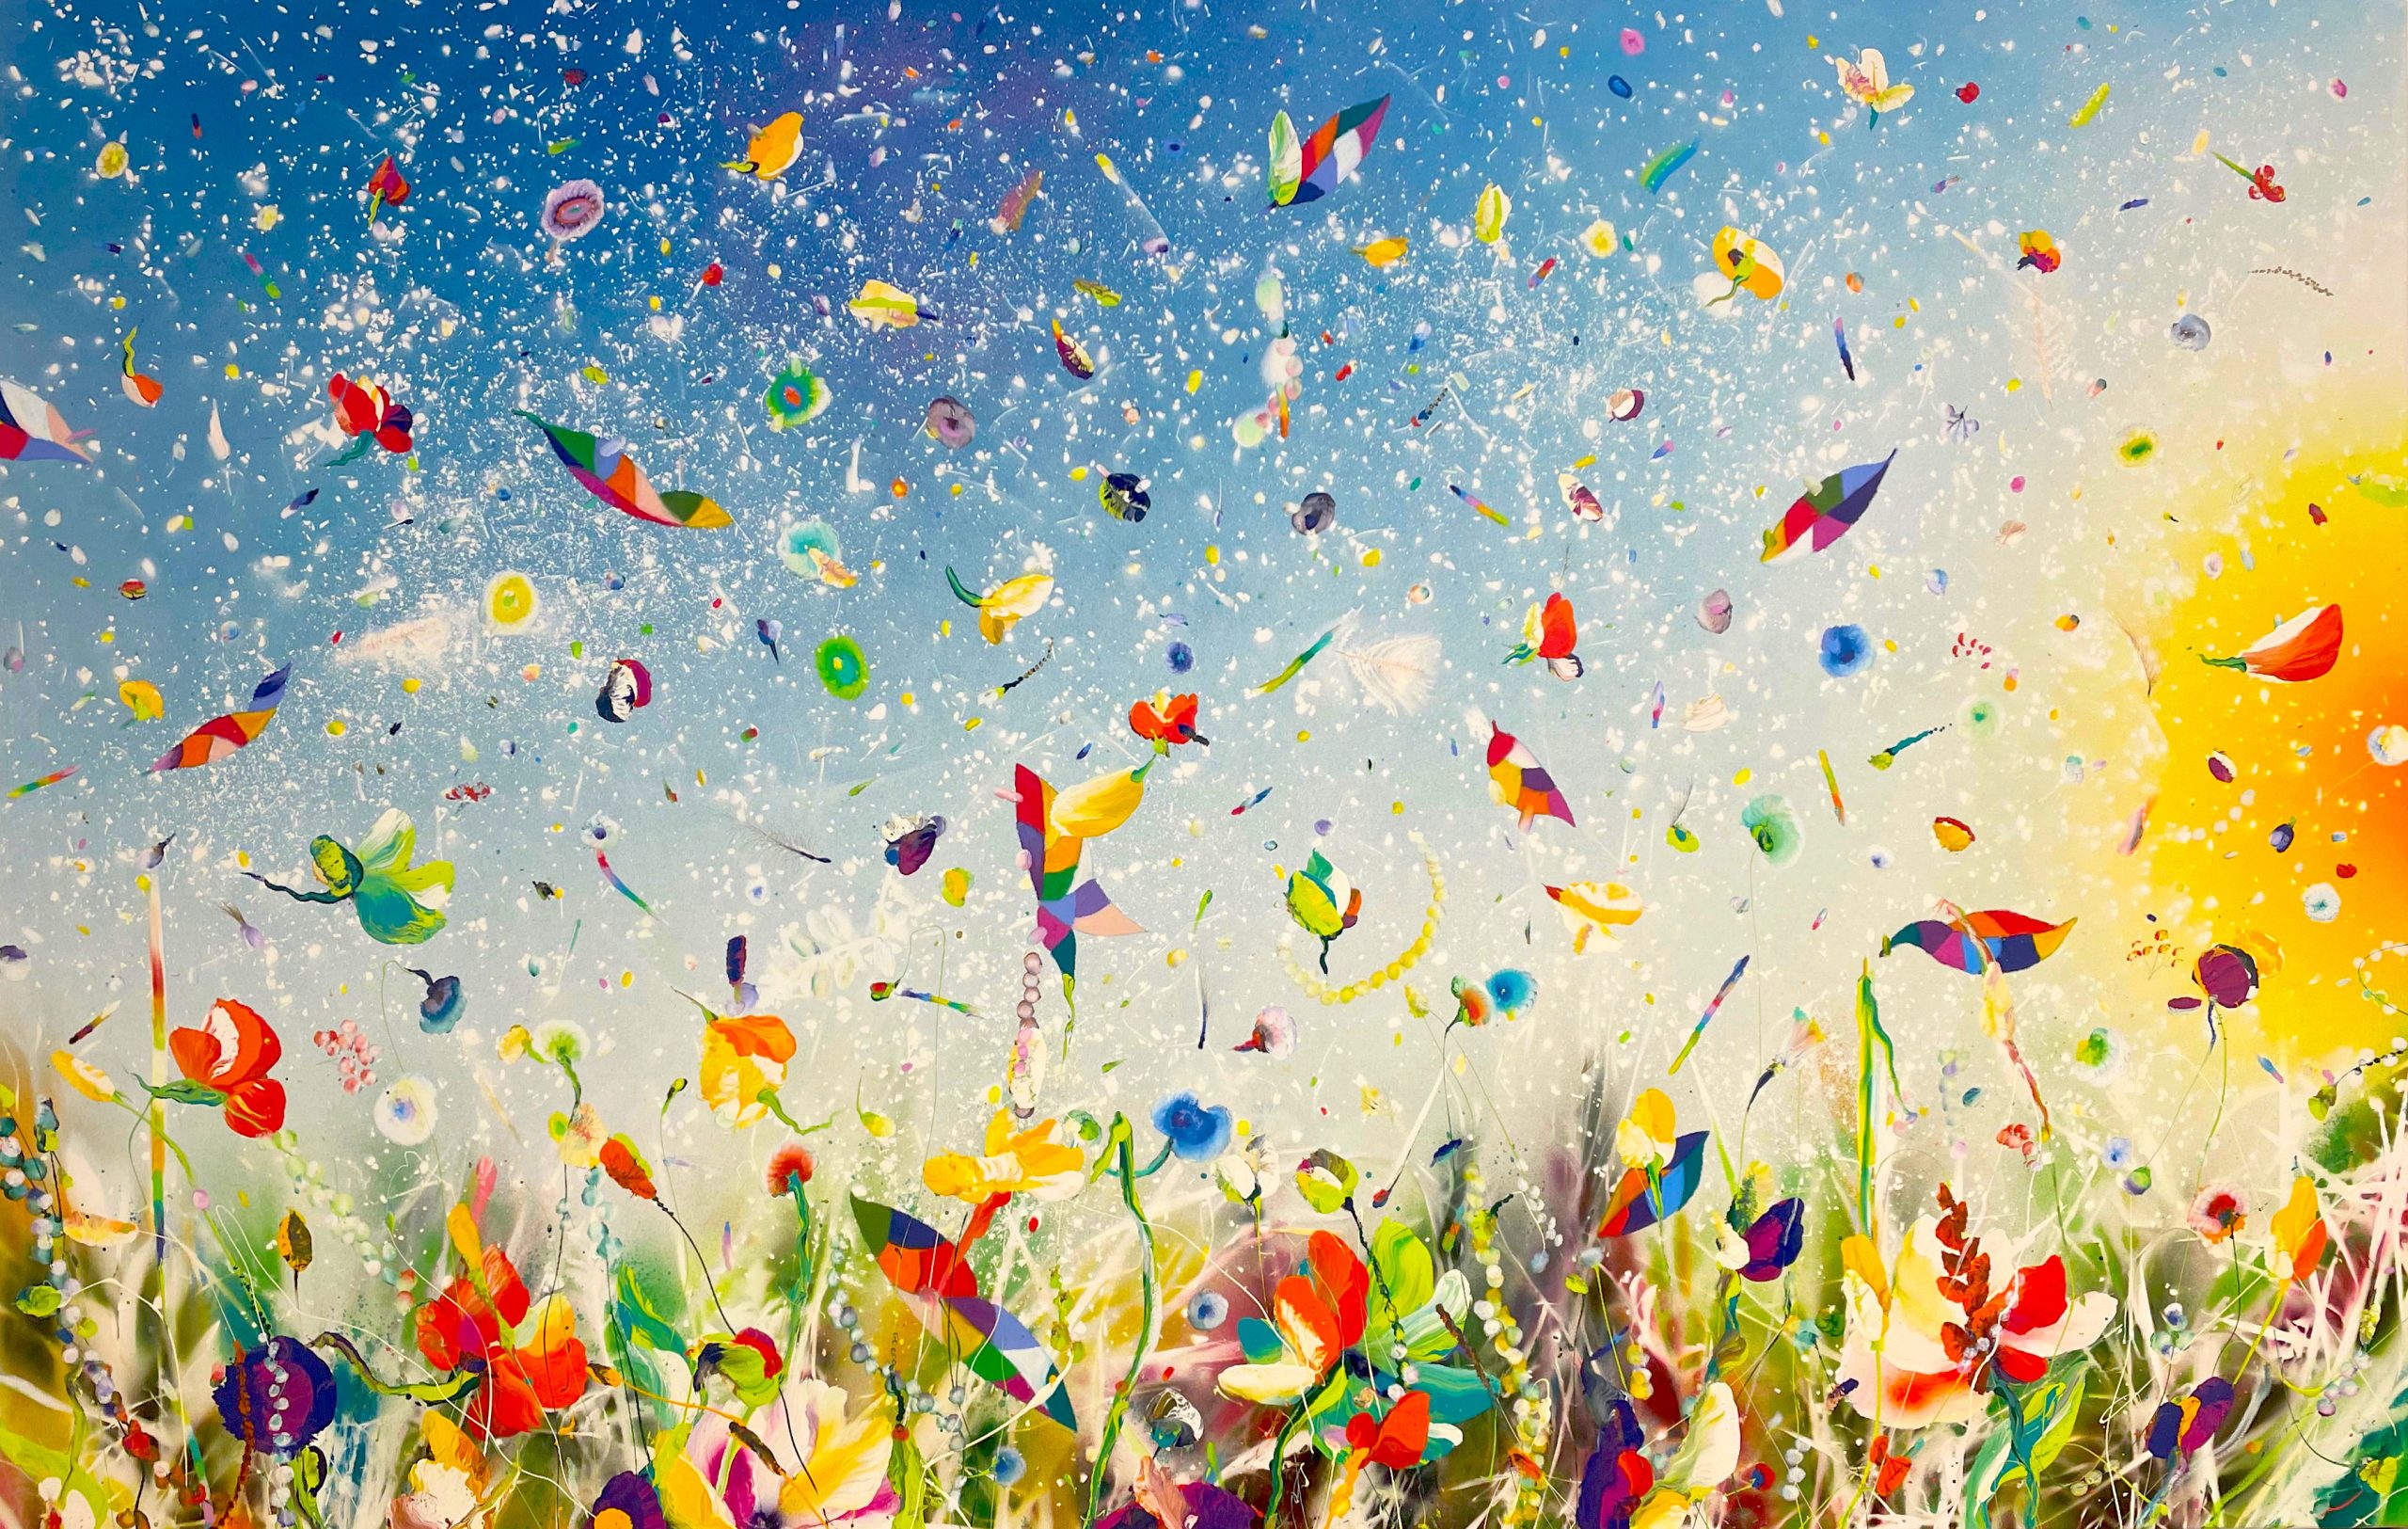 Thierry Feuz Artiste  Silent winds panorama majestic @ Marciano Contemporary